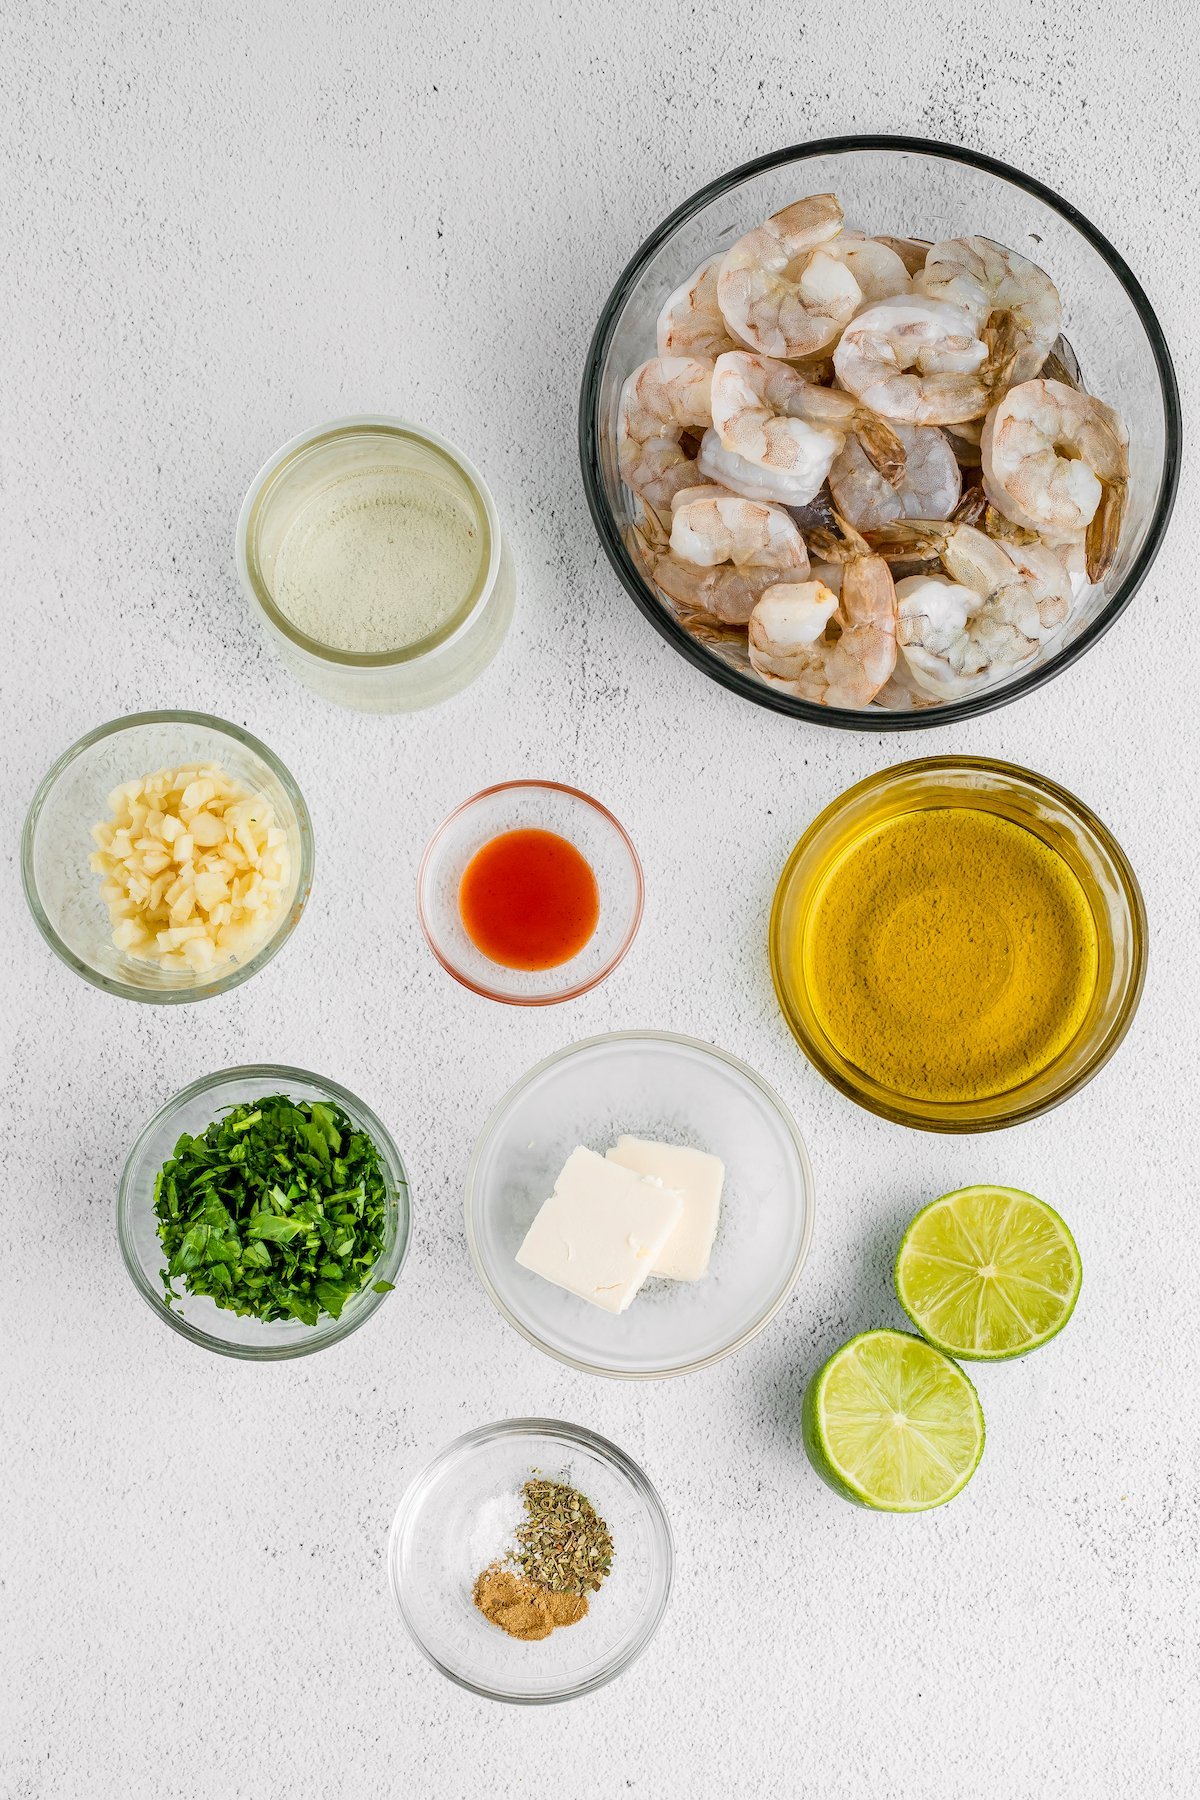 From top right: Raw shrimp, lime juice, garlic, hot sauce, olive oil, chopped parsley, butter, seasonings.